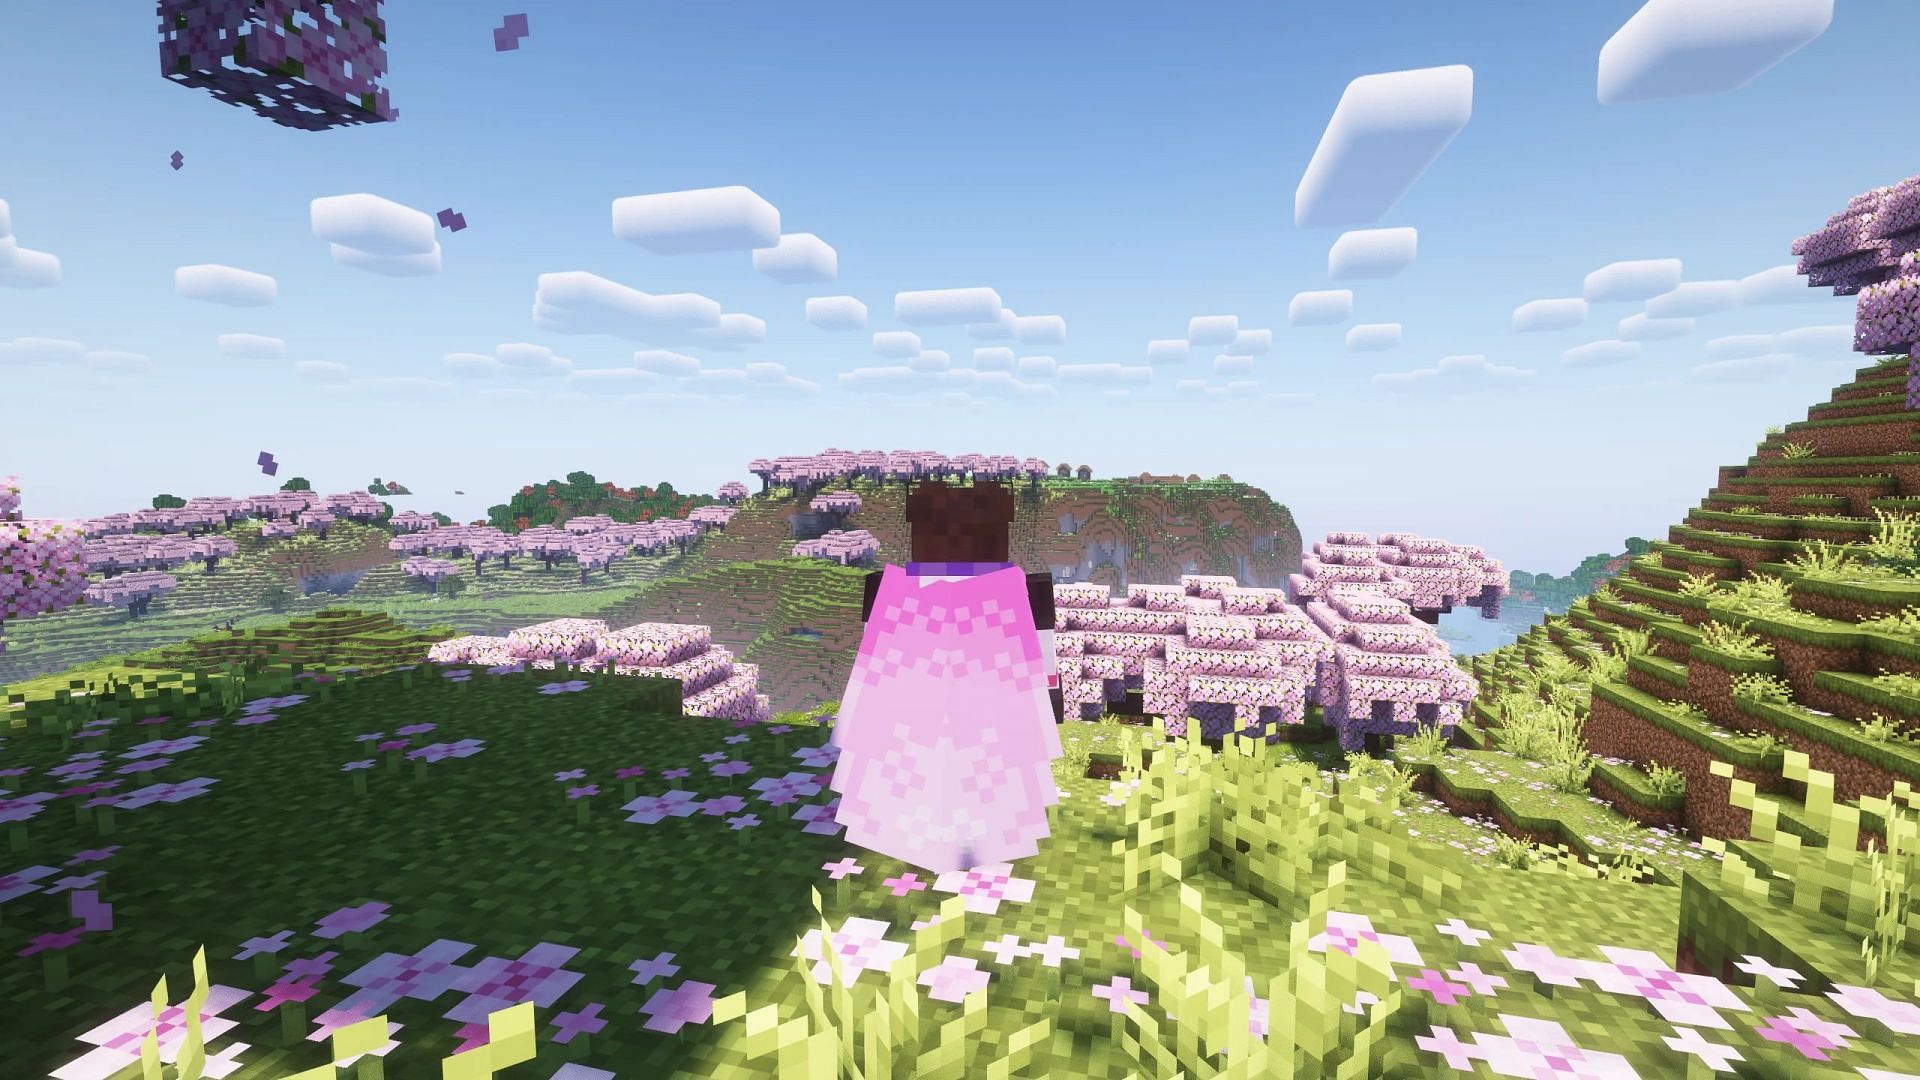 Minecraft players start receiving free cherry blossom cape for